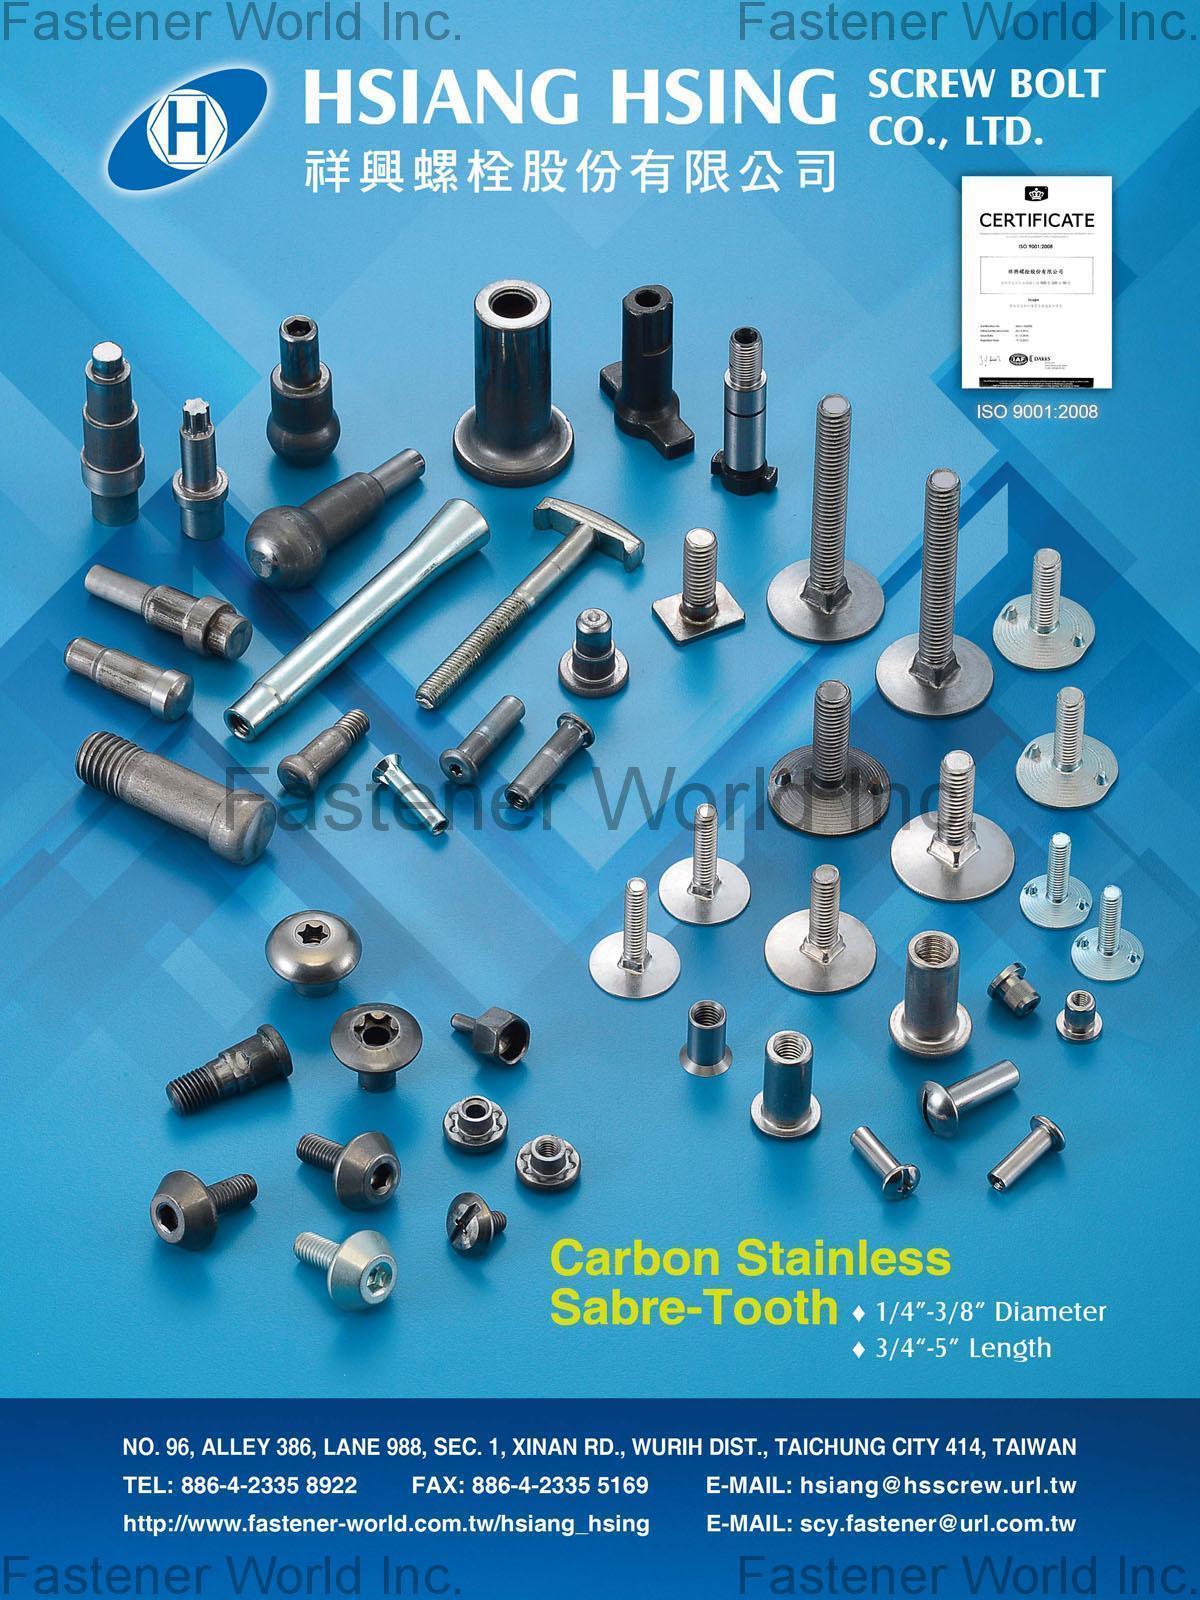 HSIANG HSING SCREW BOLT CO., LTD.  , Carbon, Stainless, Sabre-Tooth , Carbon Steel Screws